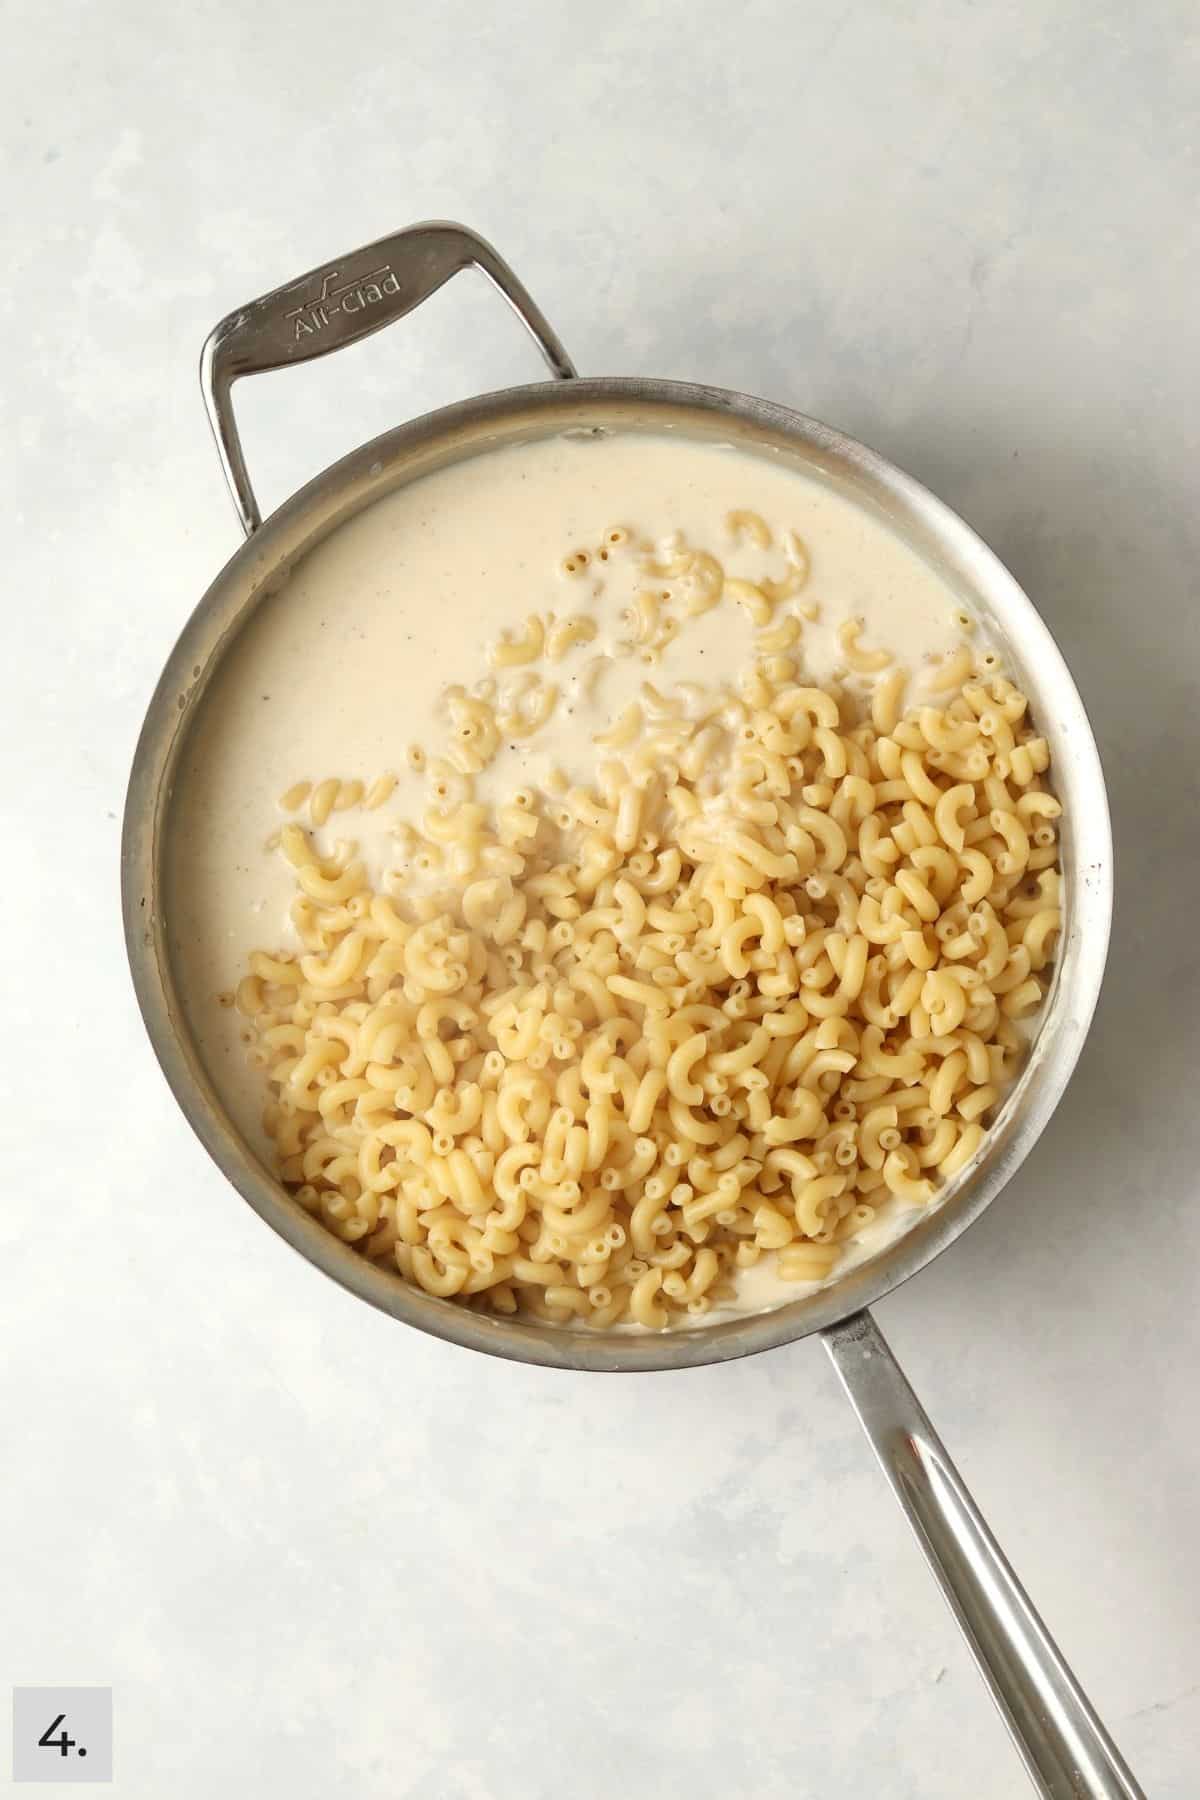 Macaroni noodles being added to white cheese sauce.